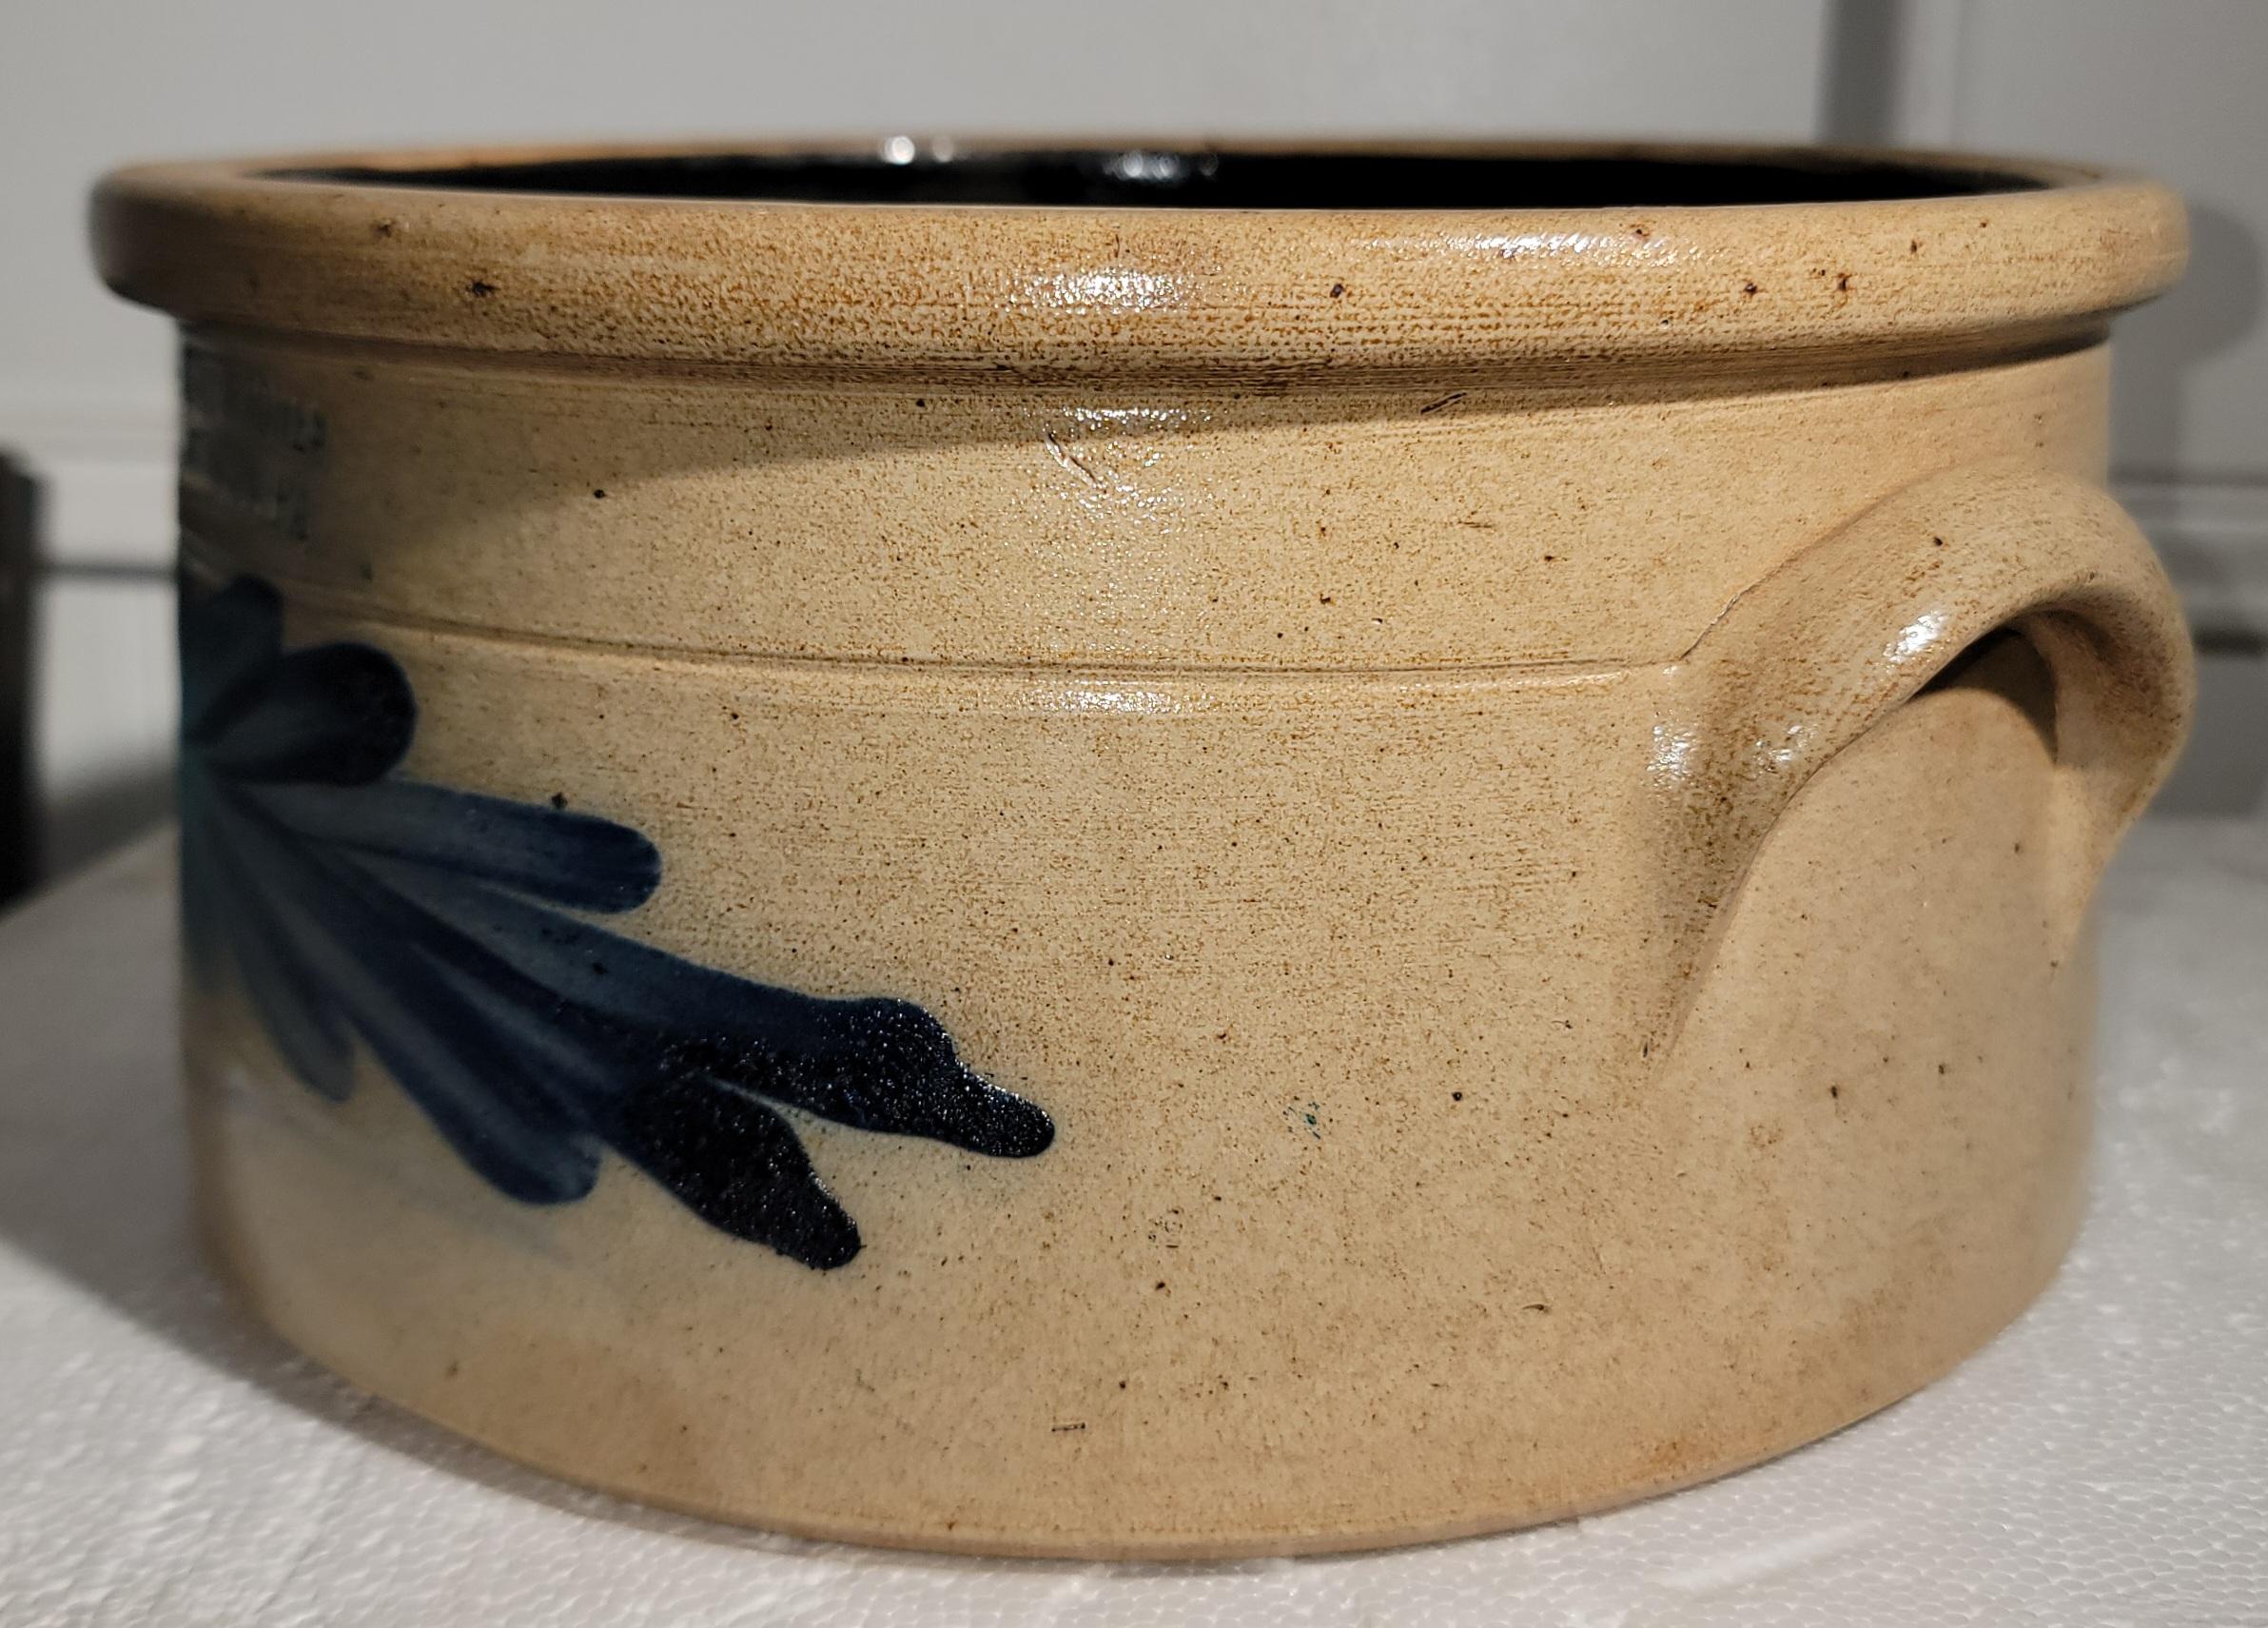 This fine 19thc decorated stone ware cake crock is signed by Evan R. Jones and made in Pittston,Pennsylvania.It has two hand applied handles on each side.This crock is in mint condition.